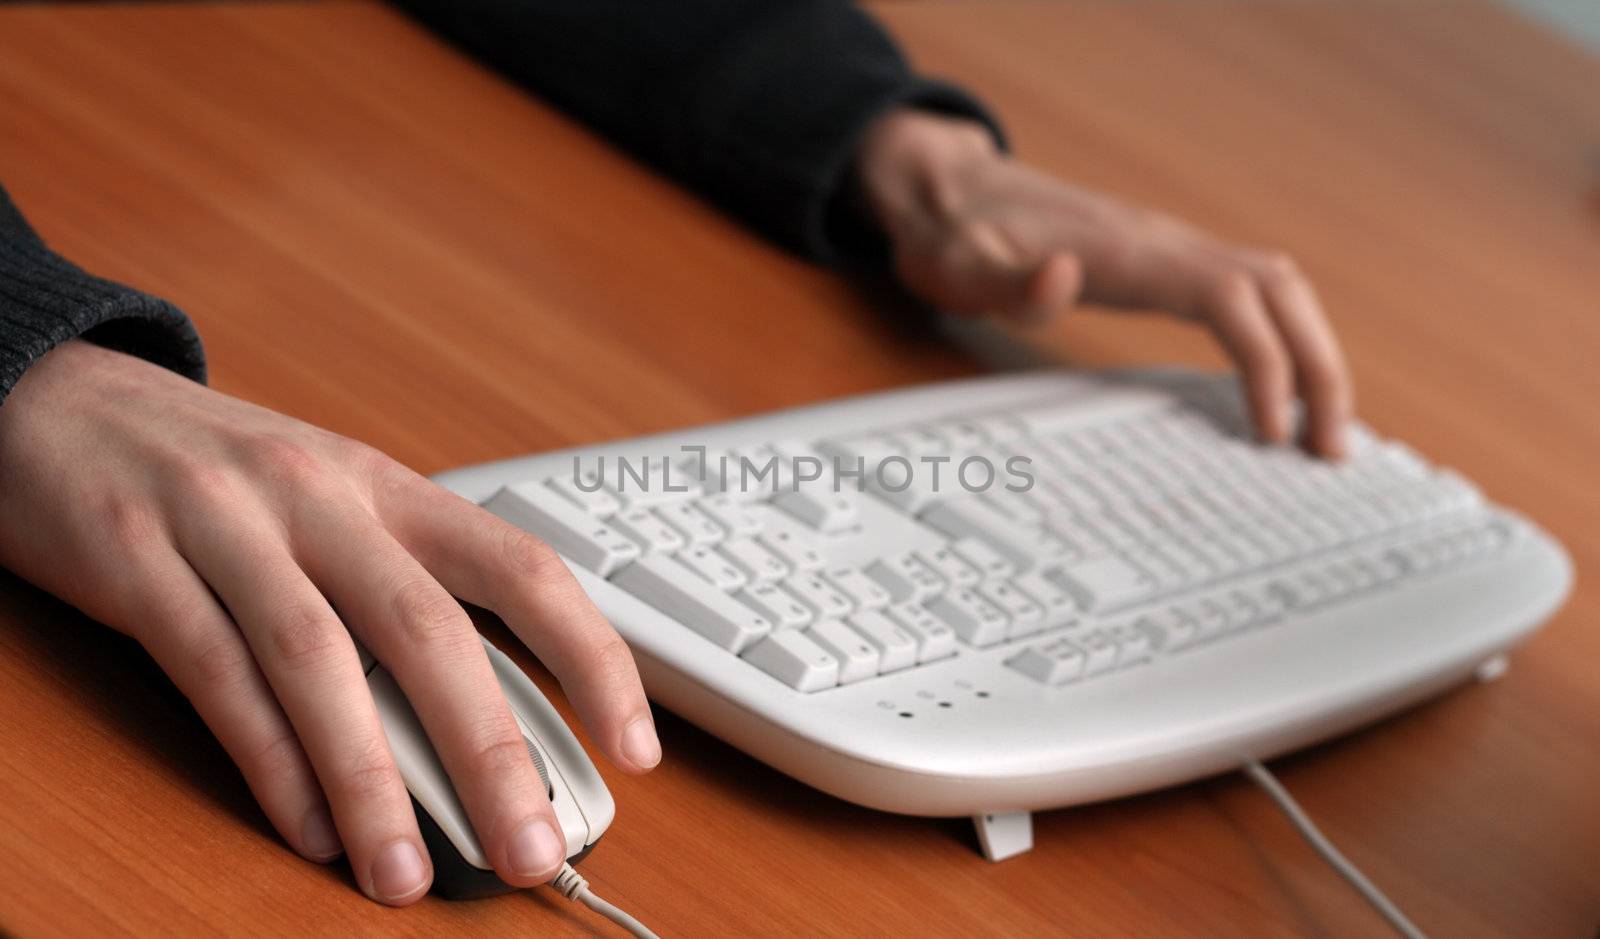 Hands of a man on mouse and keyboard by Gdolgikh